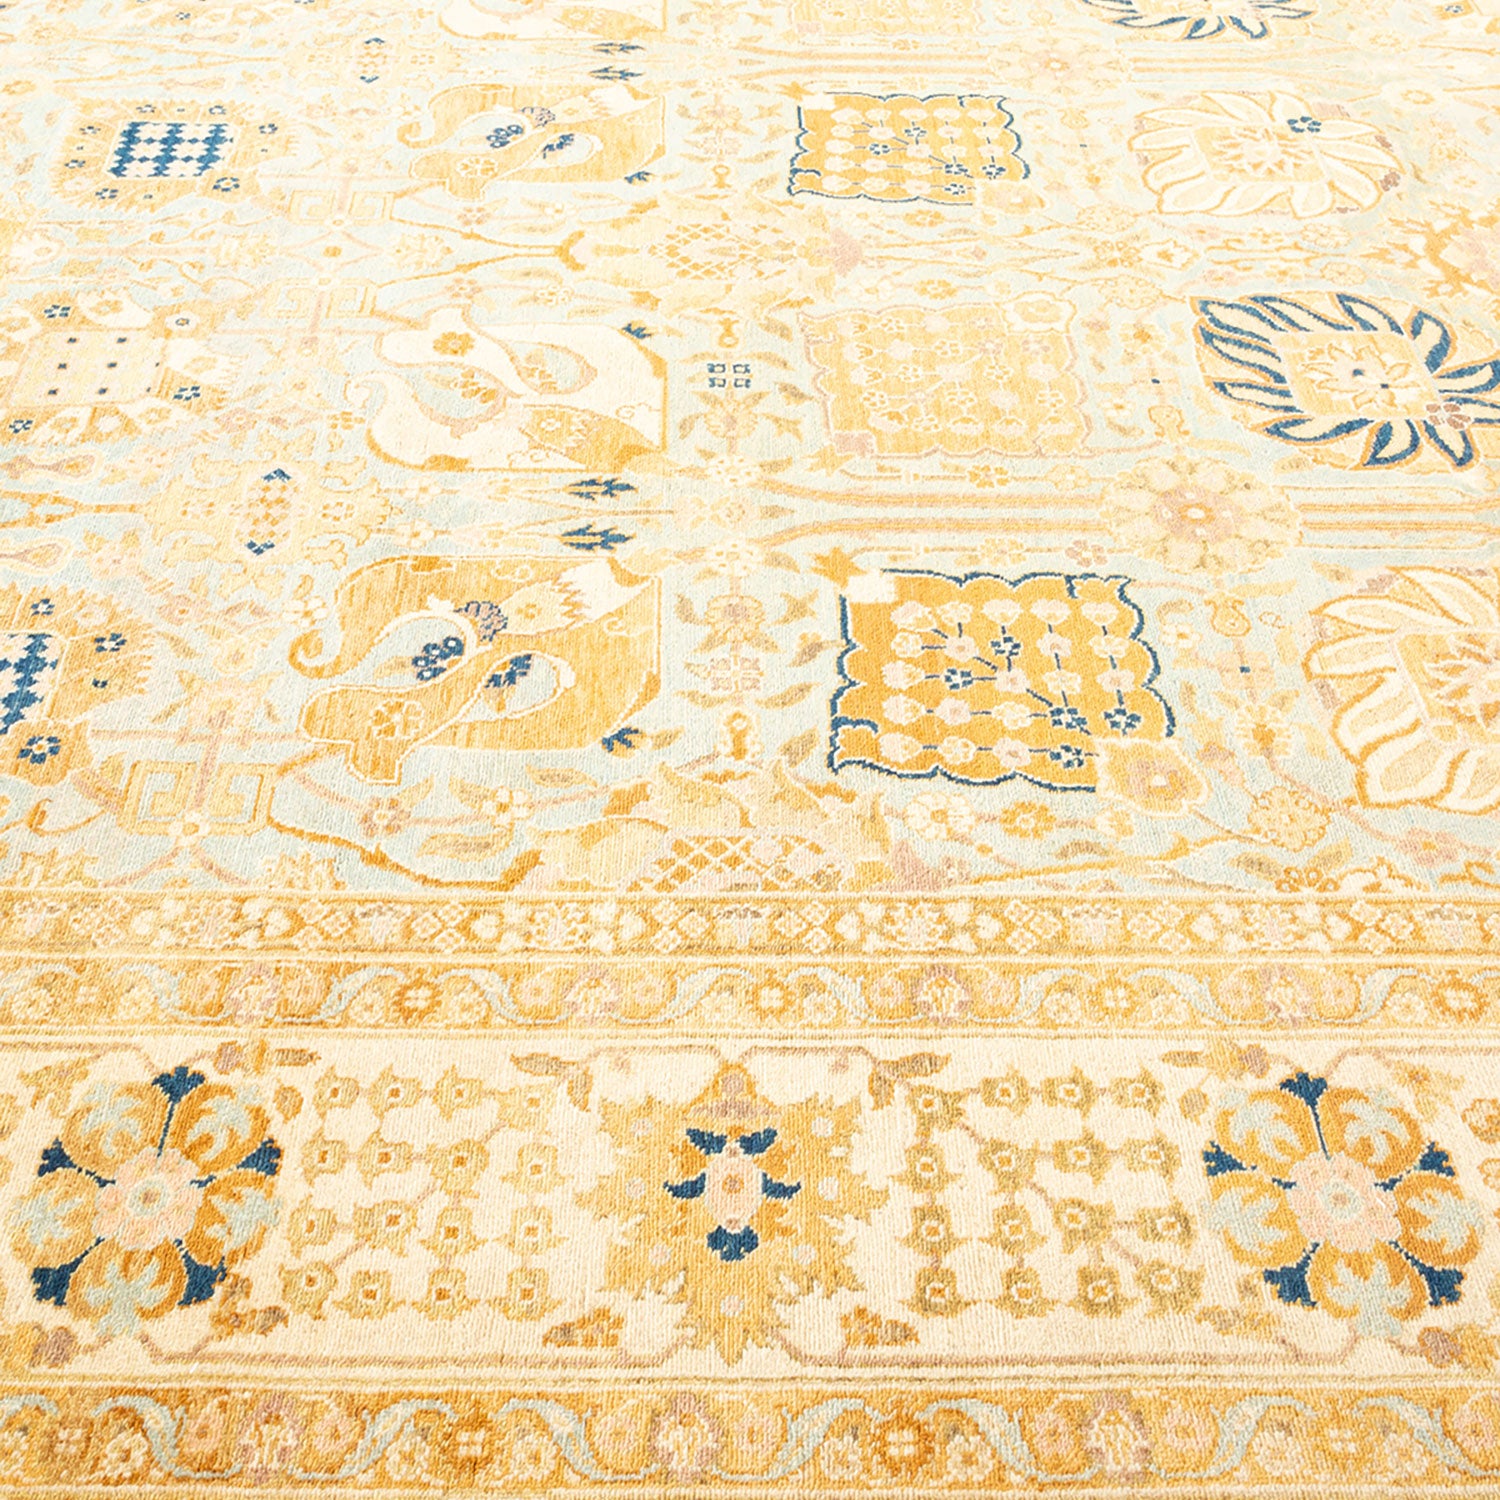 Intricate and ornate traditional rug displays symmetrical floral and geometric motifs.